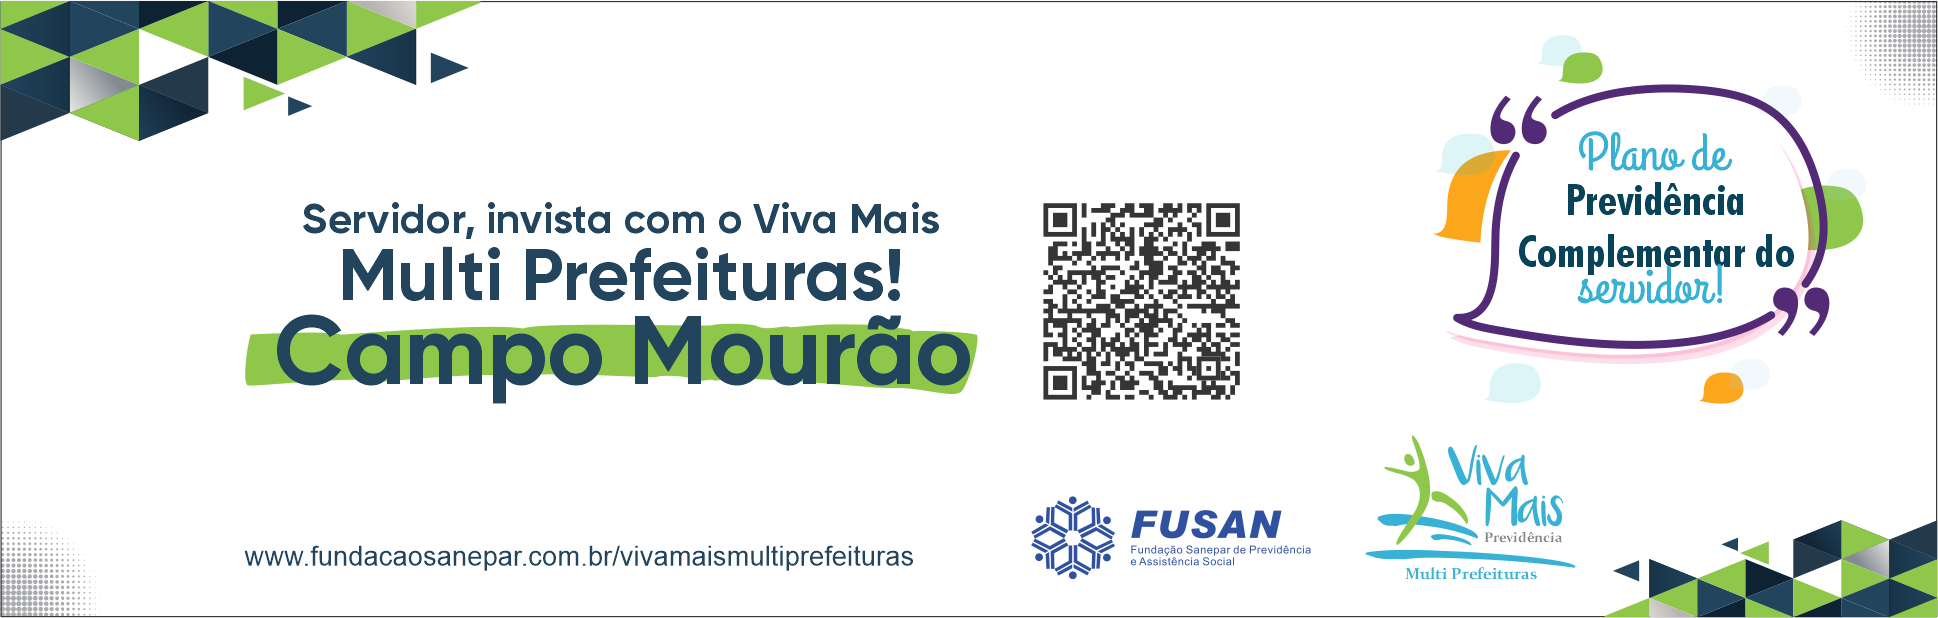 campo mourao-banner.png